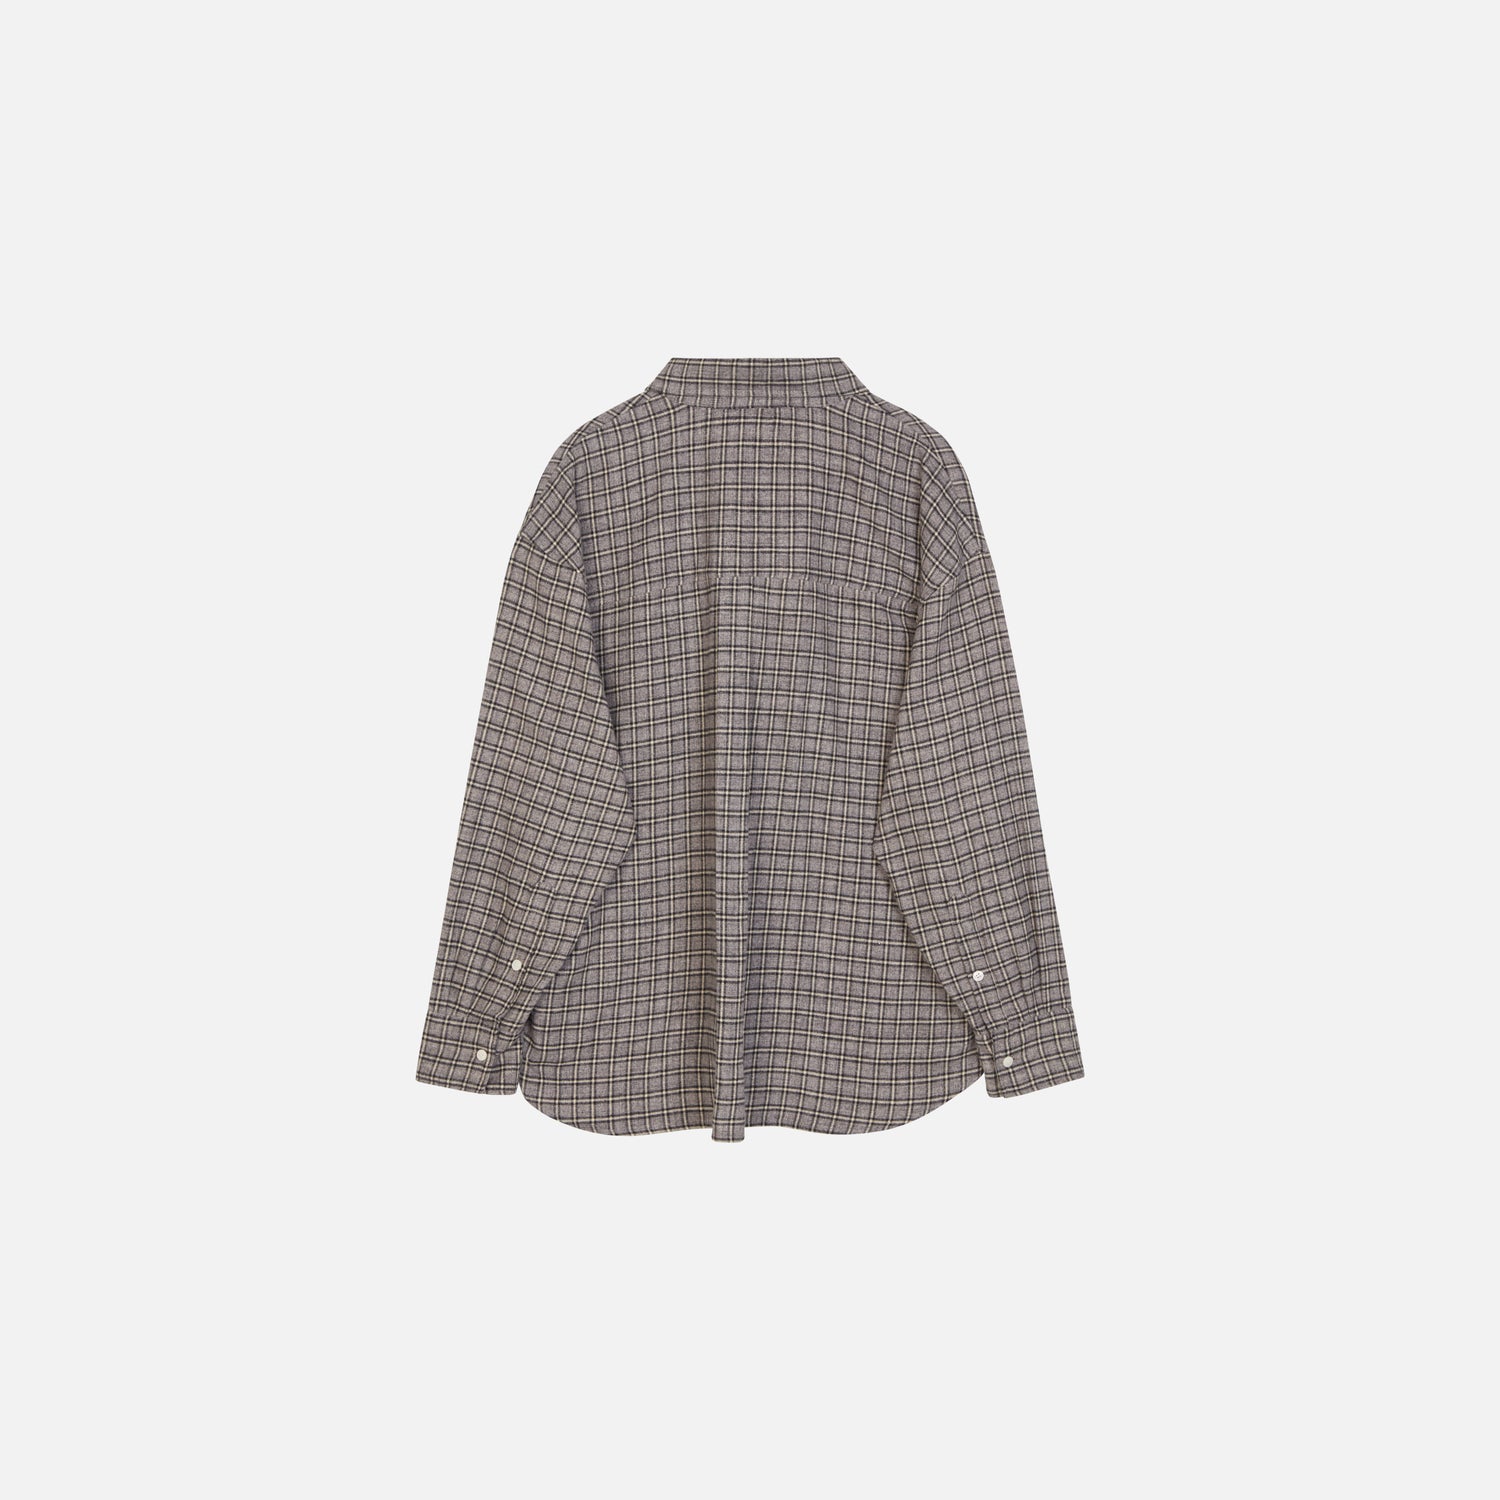 ROCCO SHIRT IN CHARCOAL CHECK